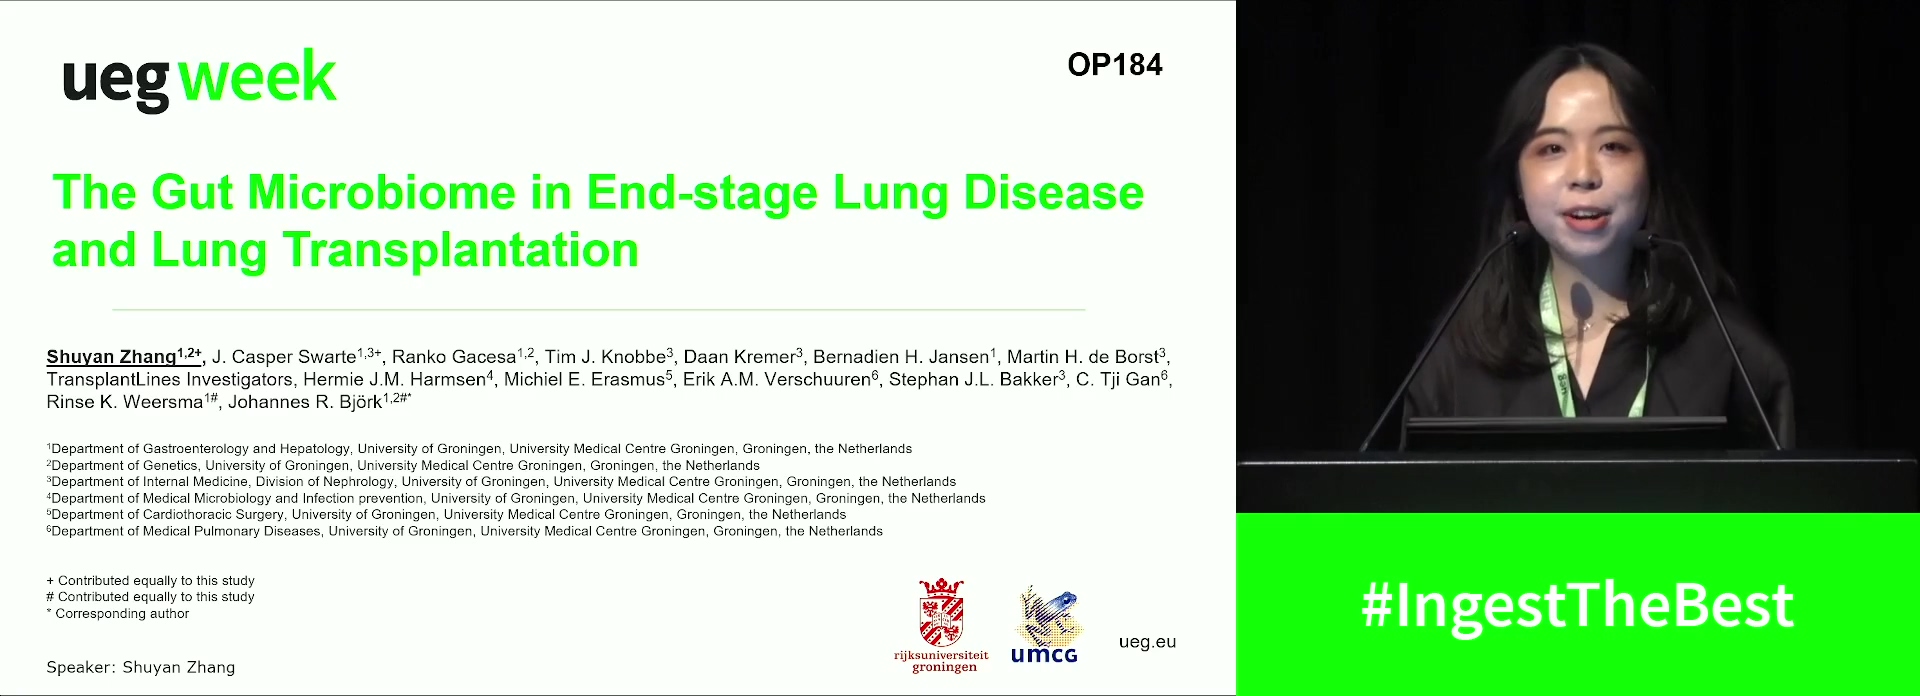 THE GUT MICROBIOME IN END-STAGE LUNG DISEASE AND LUNG TRANSPLANTATION